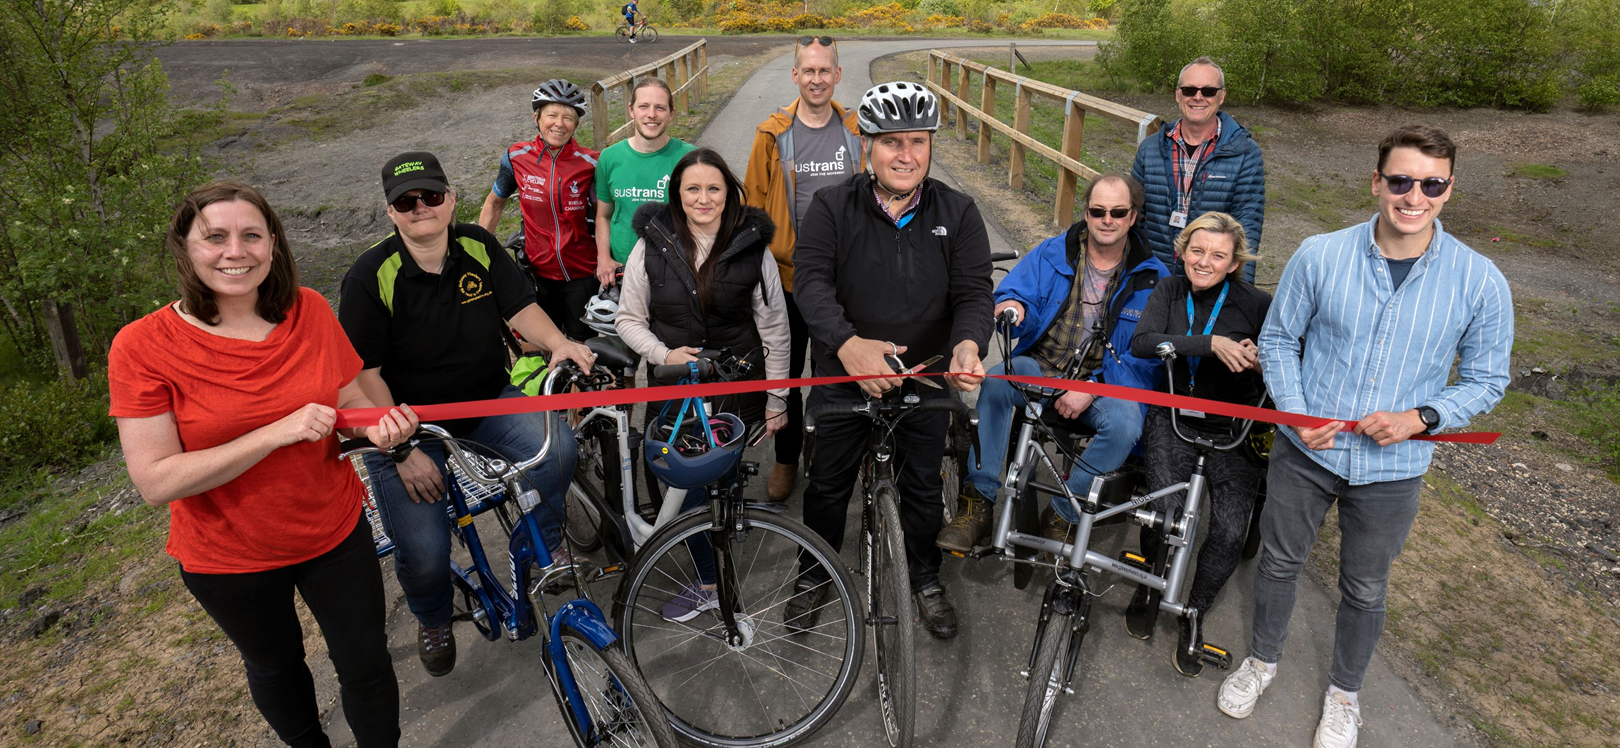 Pics show representatives from Durham County Council, Sustrans, and local cycling and walking groups making the most of the NCN1 improvements.